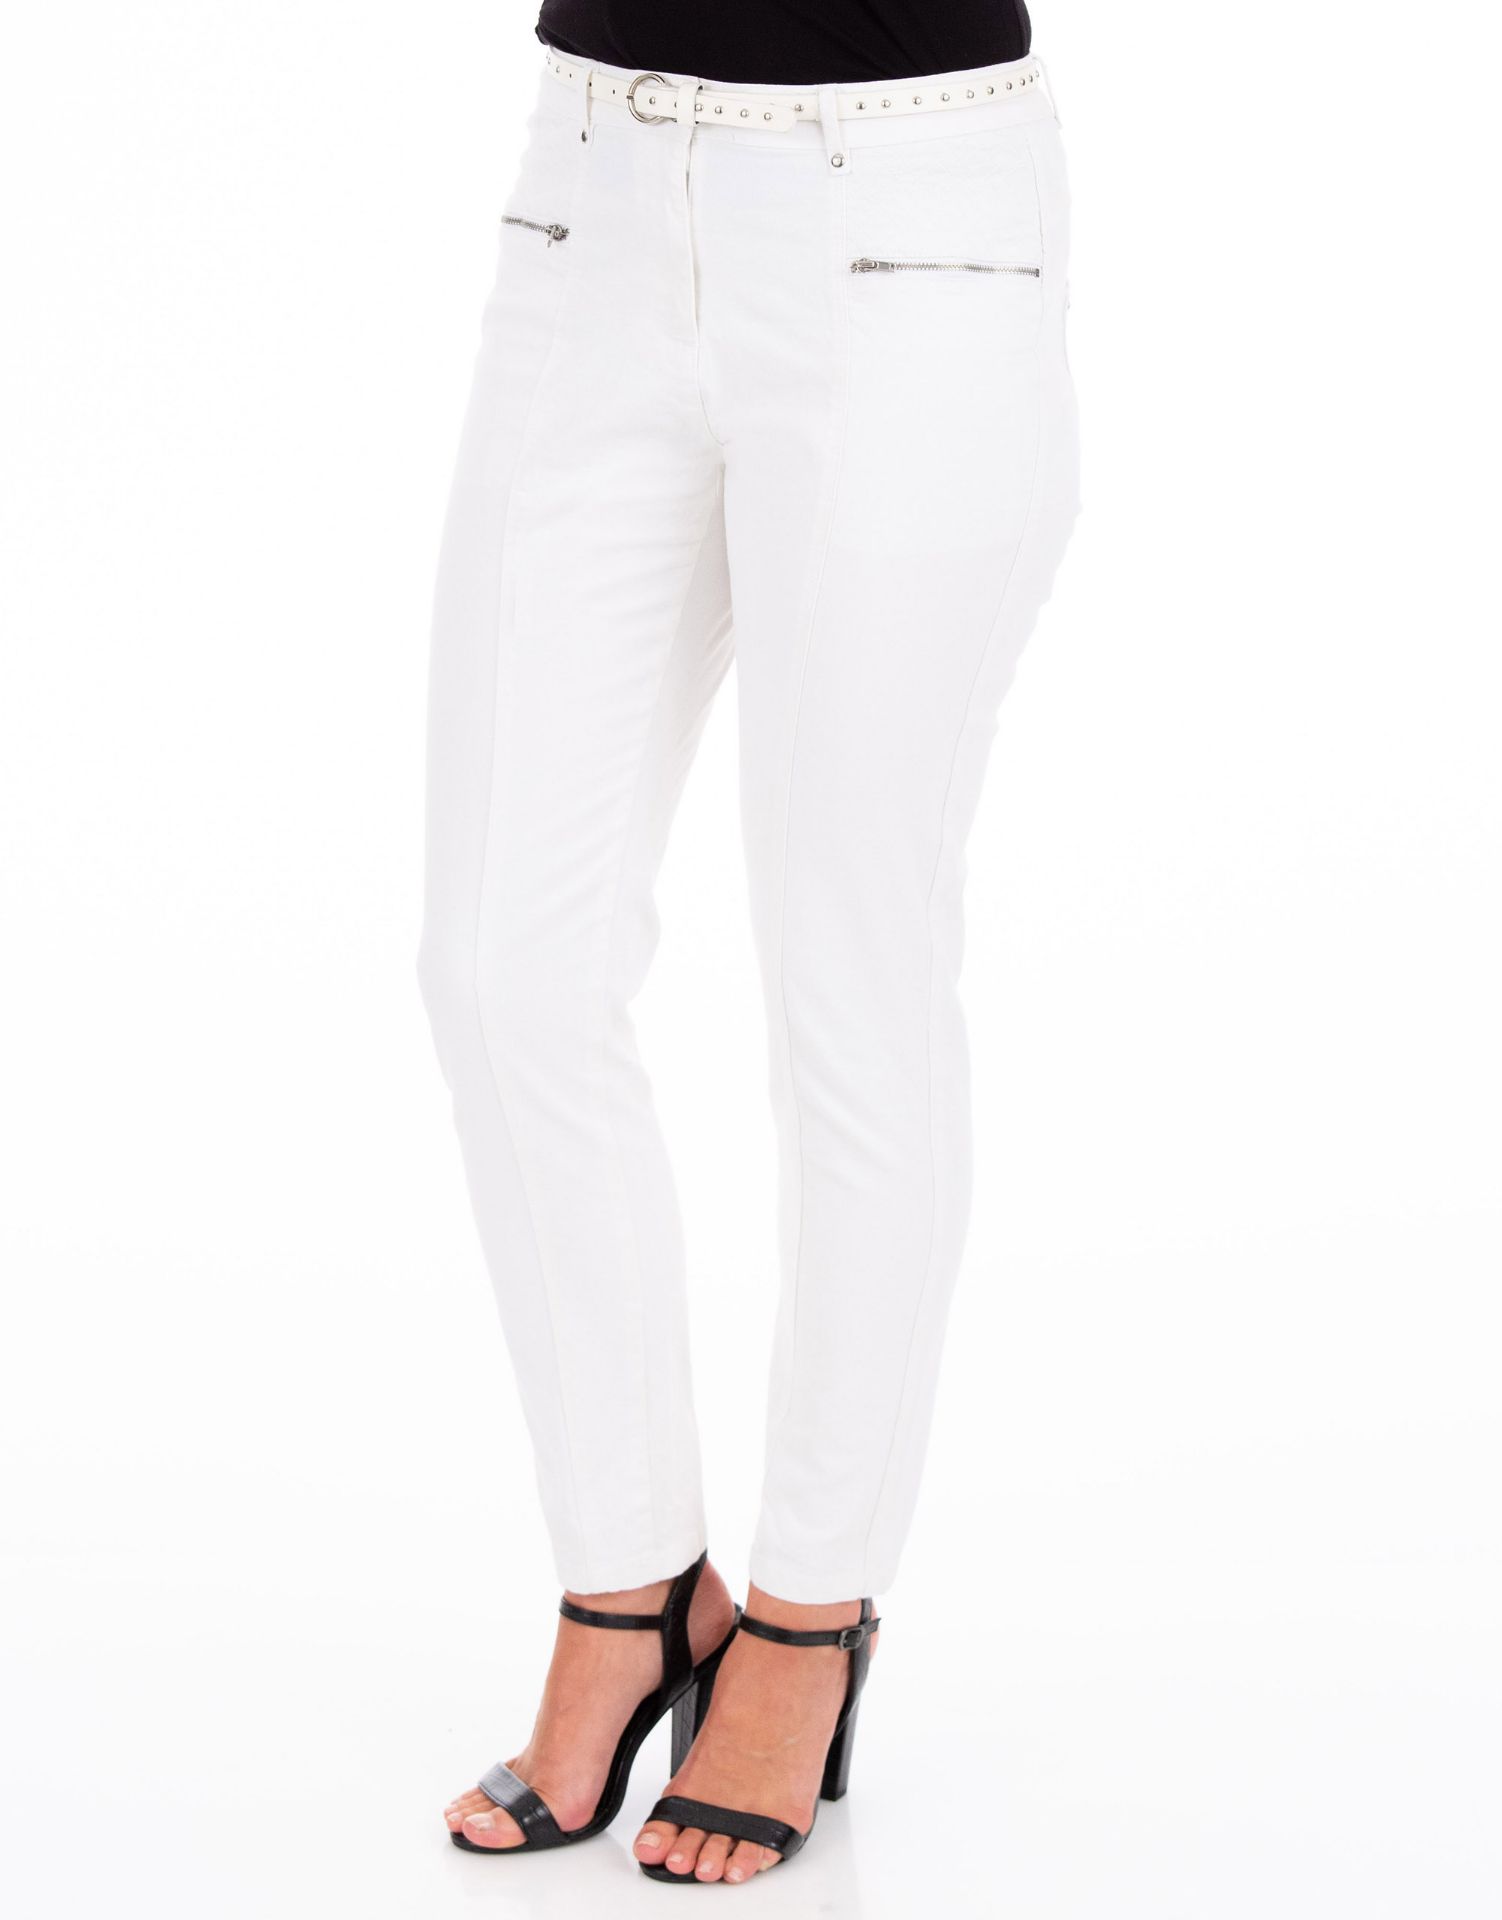 2,787 x Ladies Slim Leg Belted Trousers | Black and White | Sizes 10-20 - Image 6 of 6